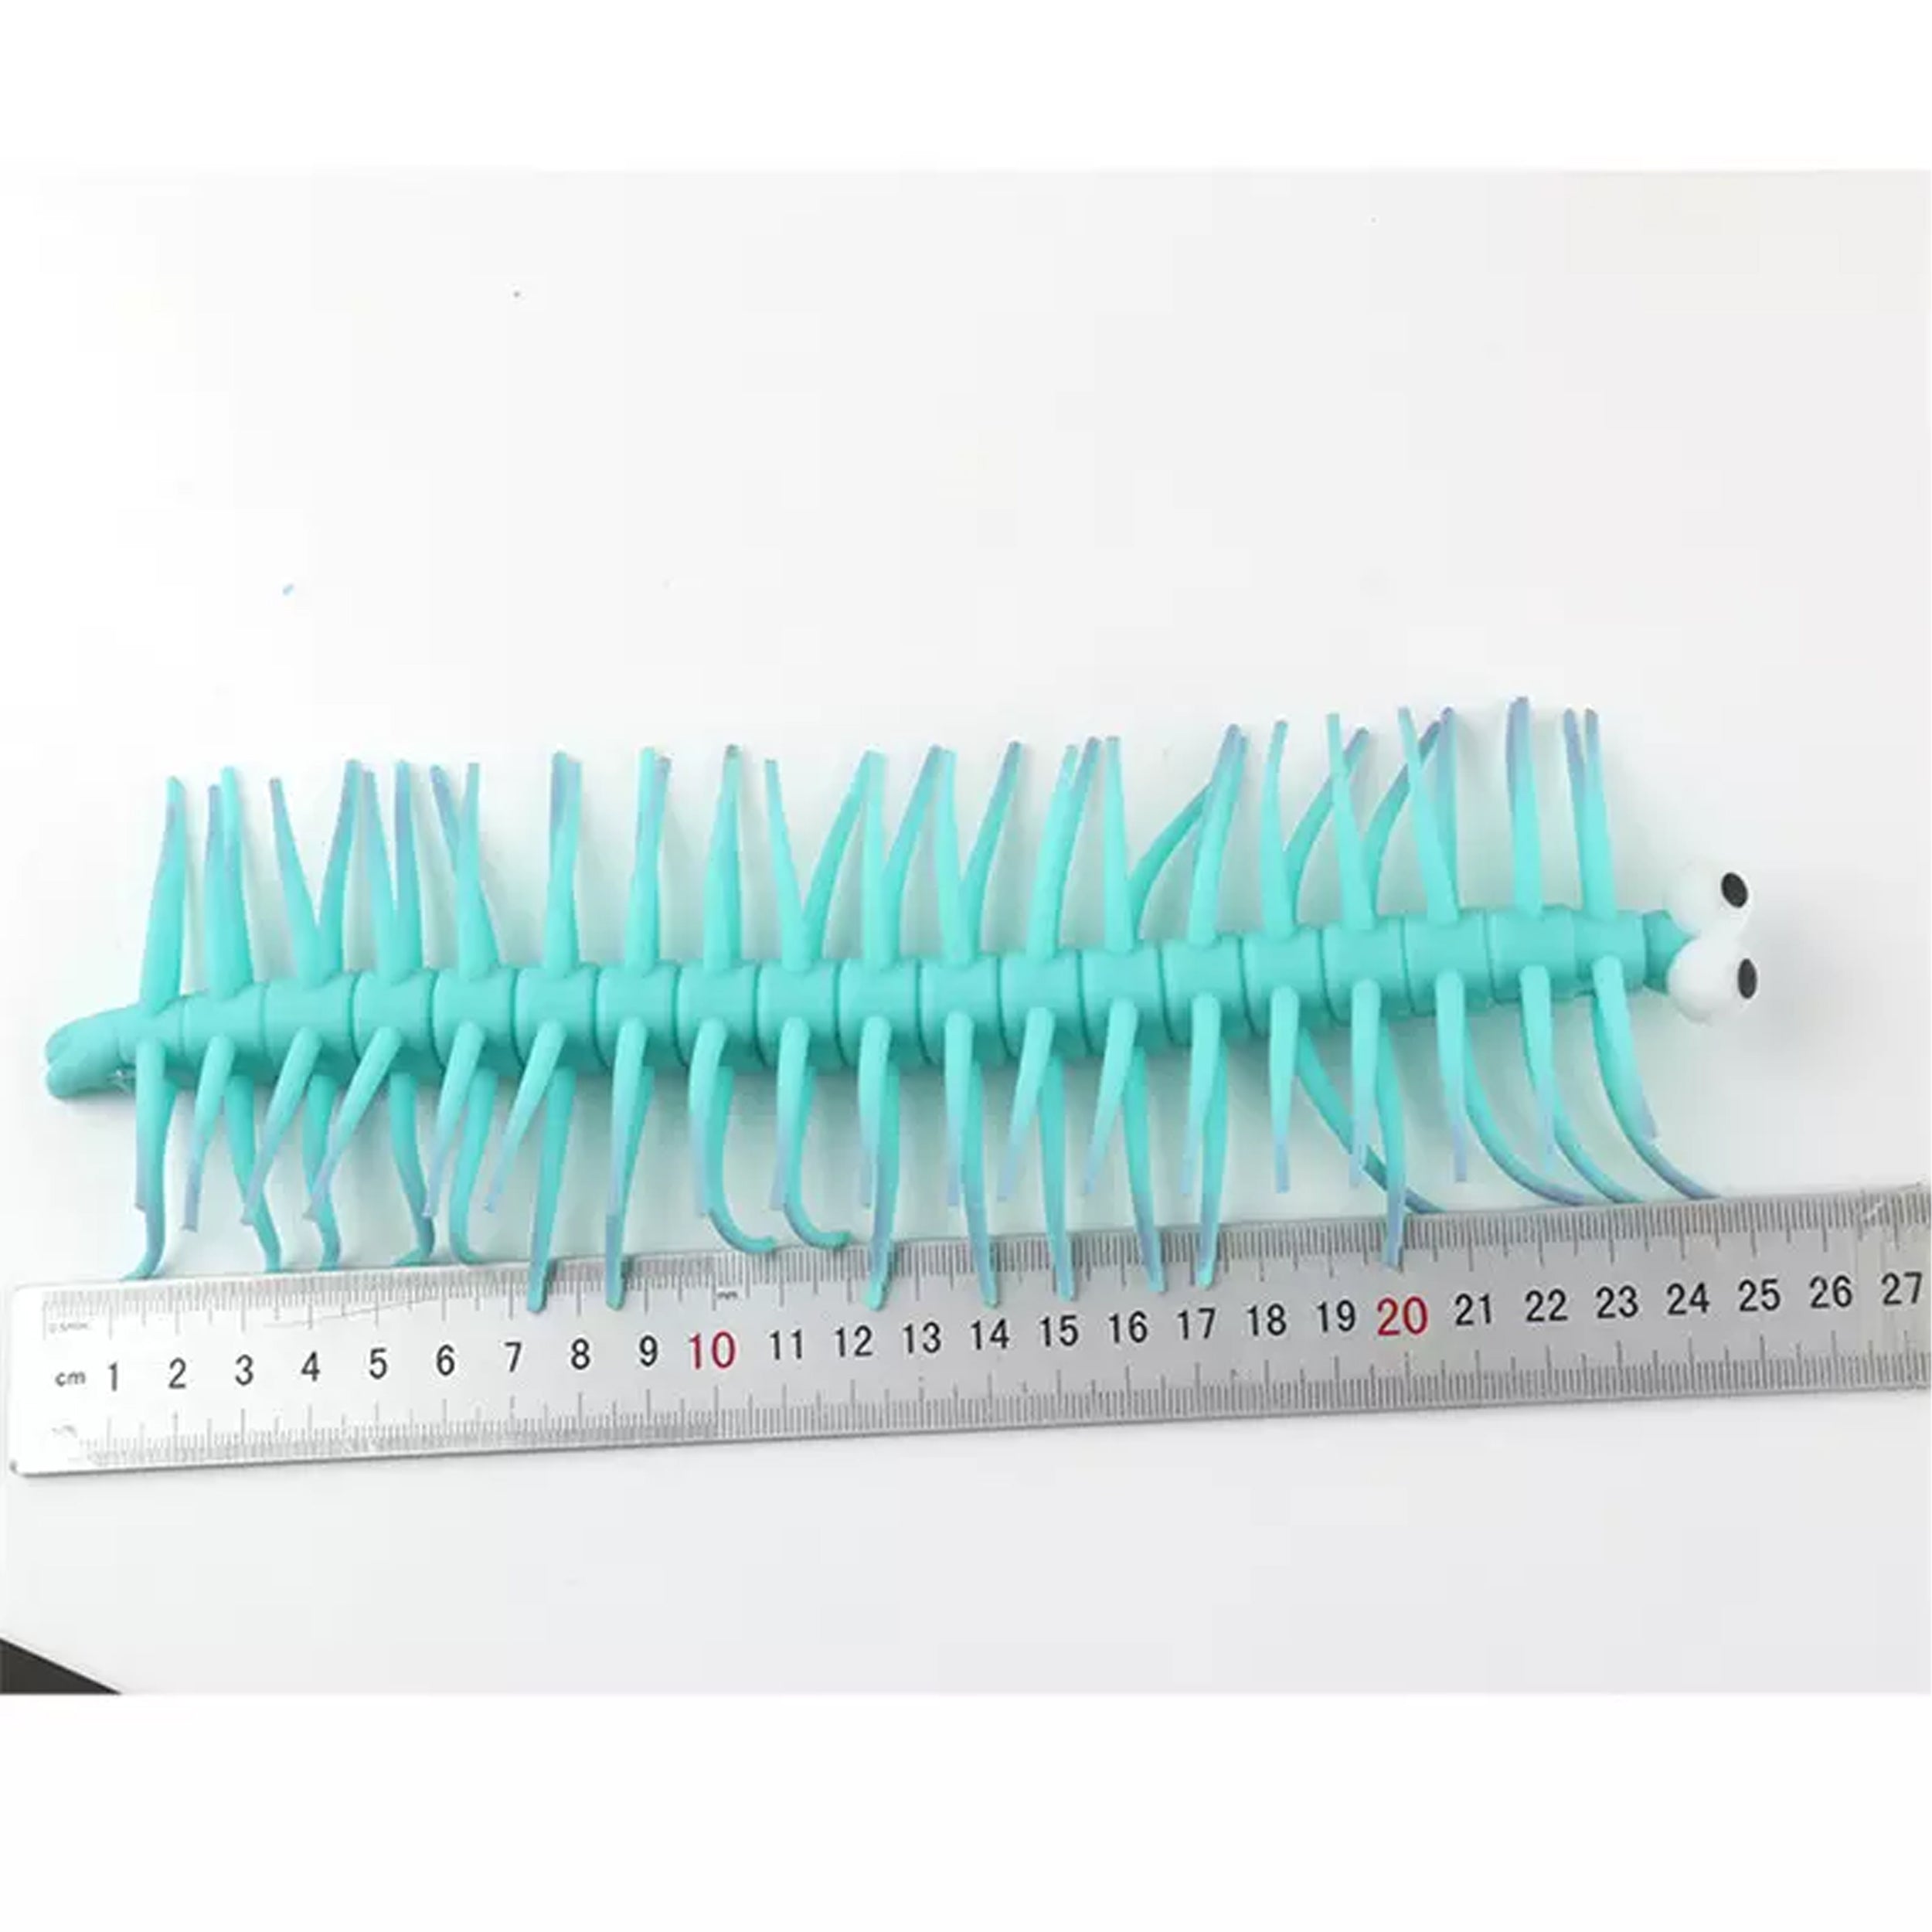 Stretchy String Stress Relief Toy - Centipede - Fun and Relaxing Sensory Fidget Toy